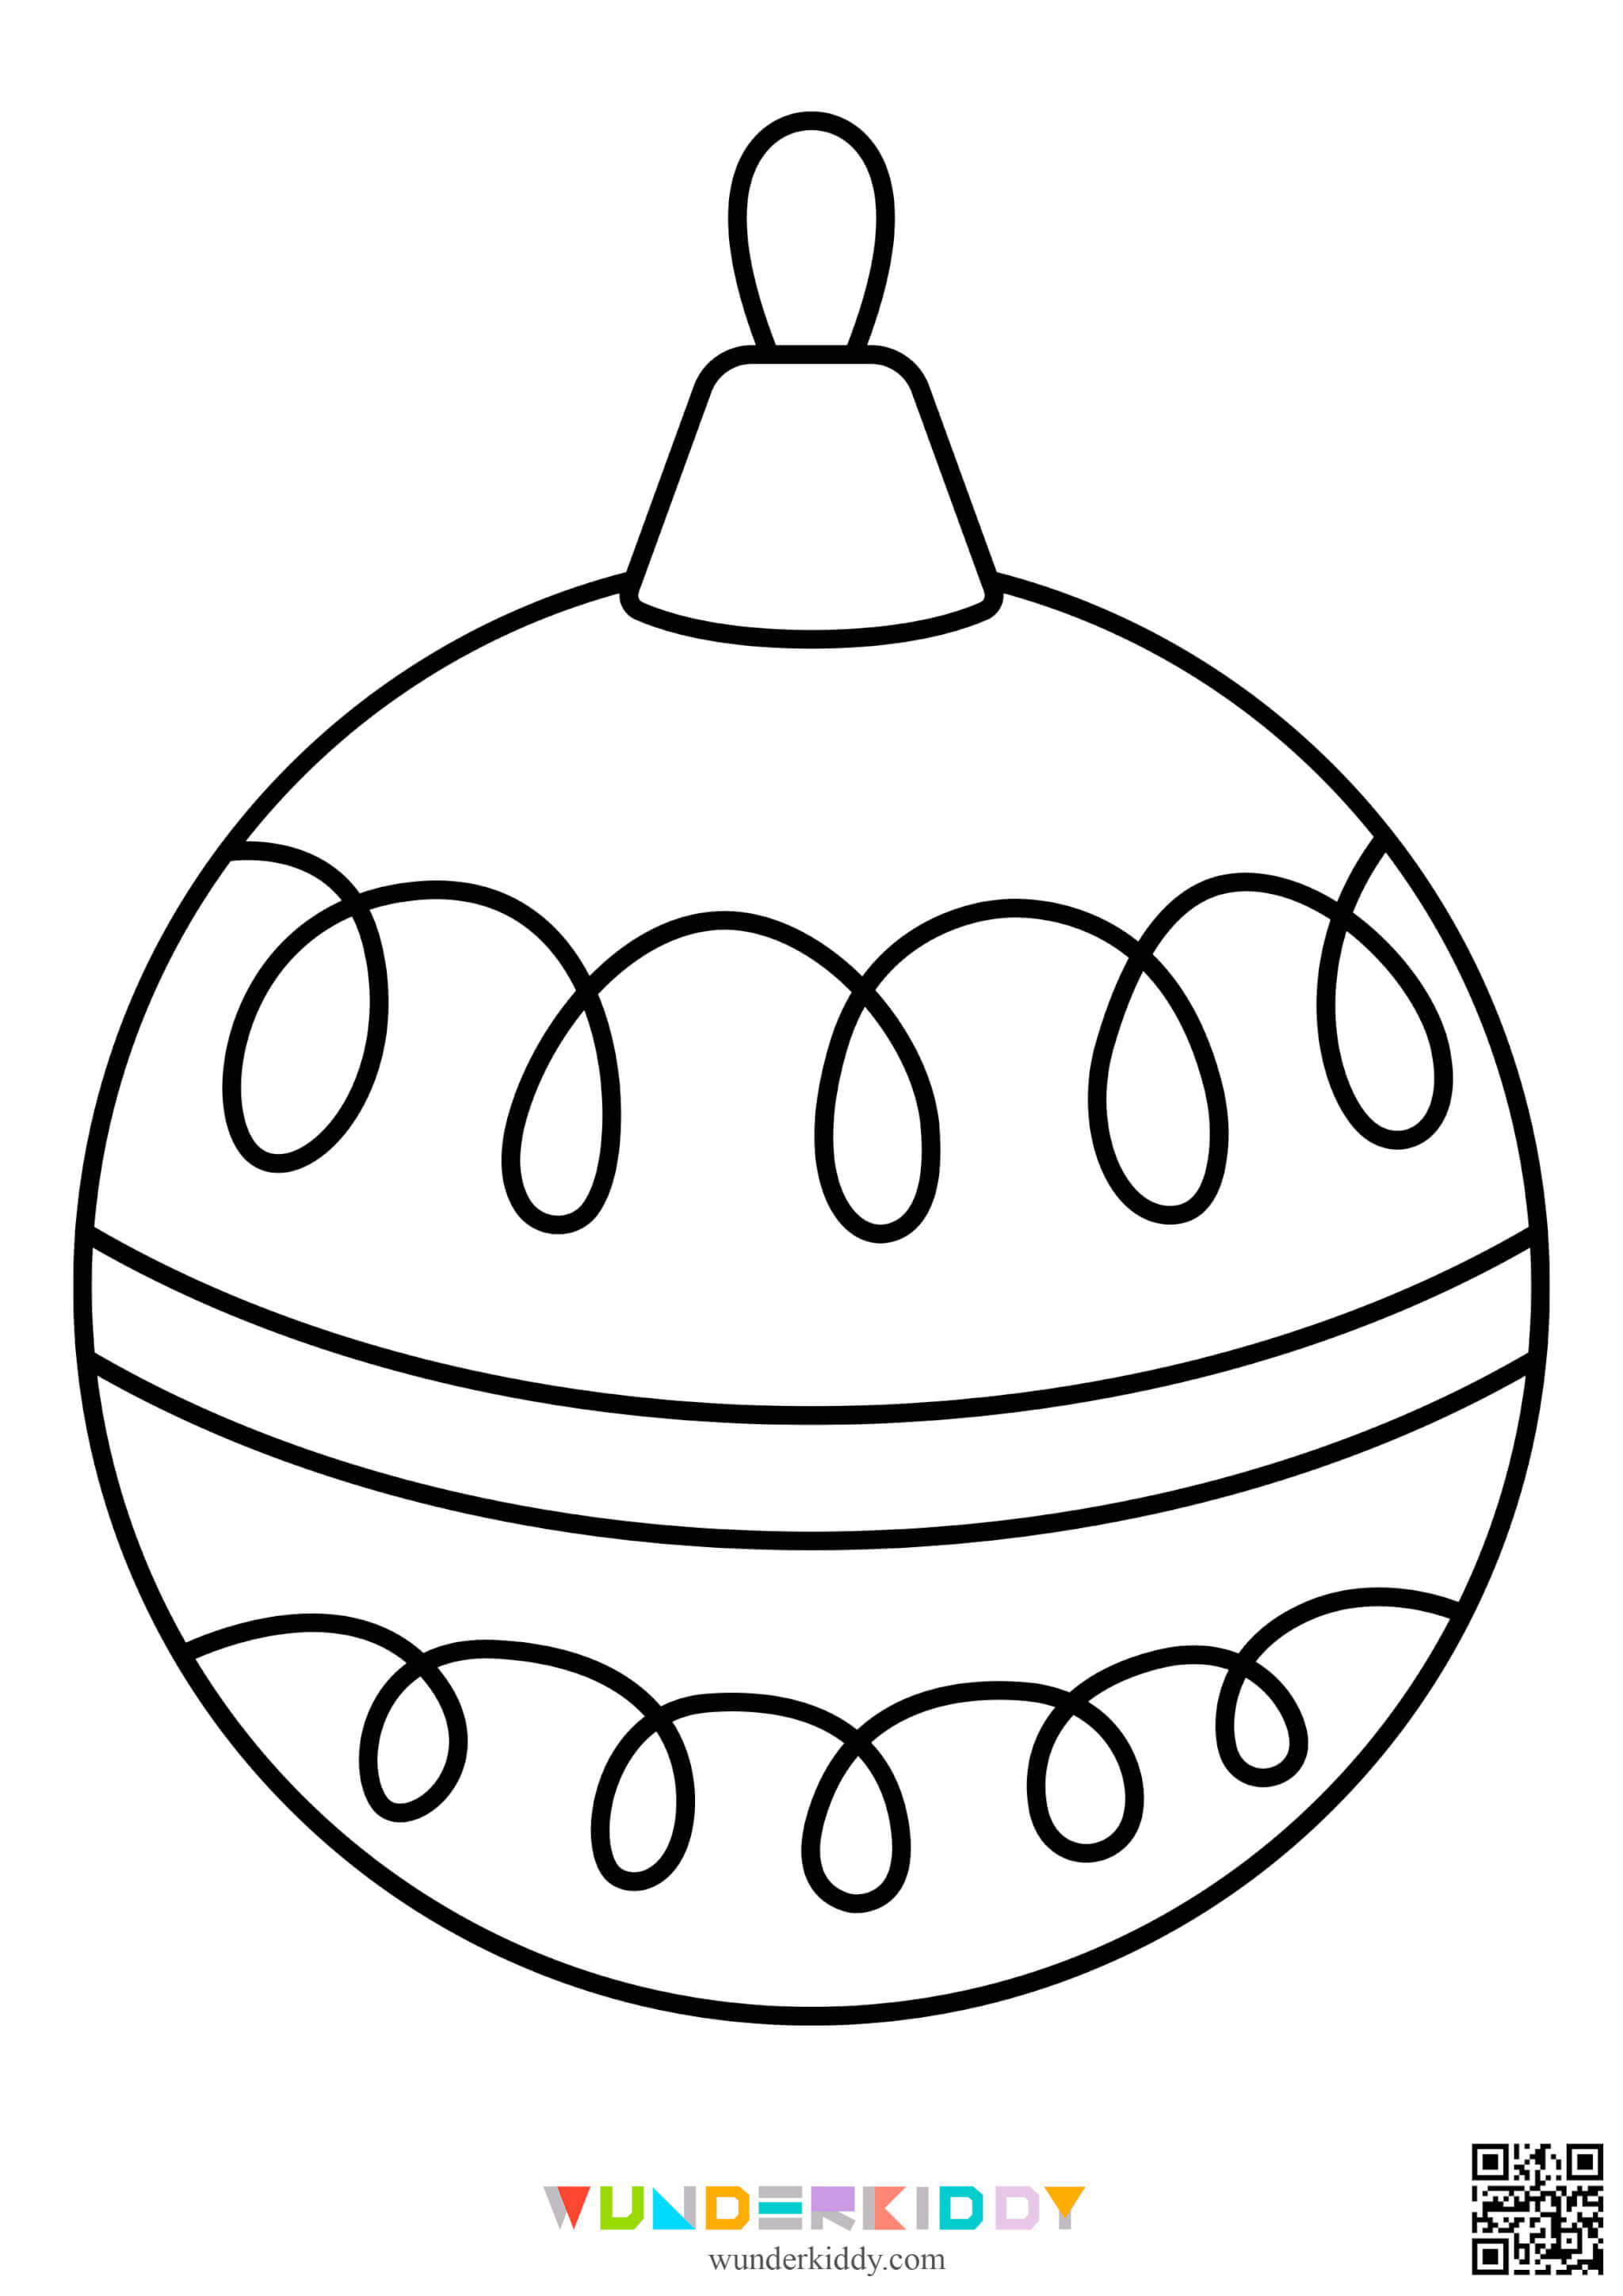 Christmas Ornament Coloring Pages - Image 3